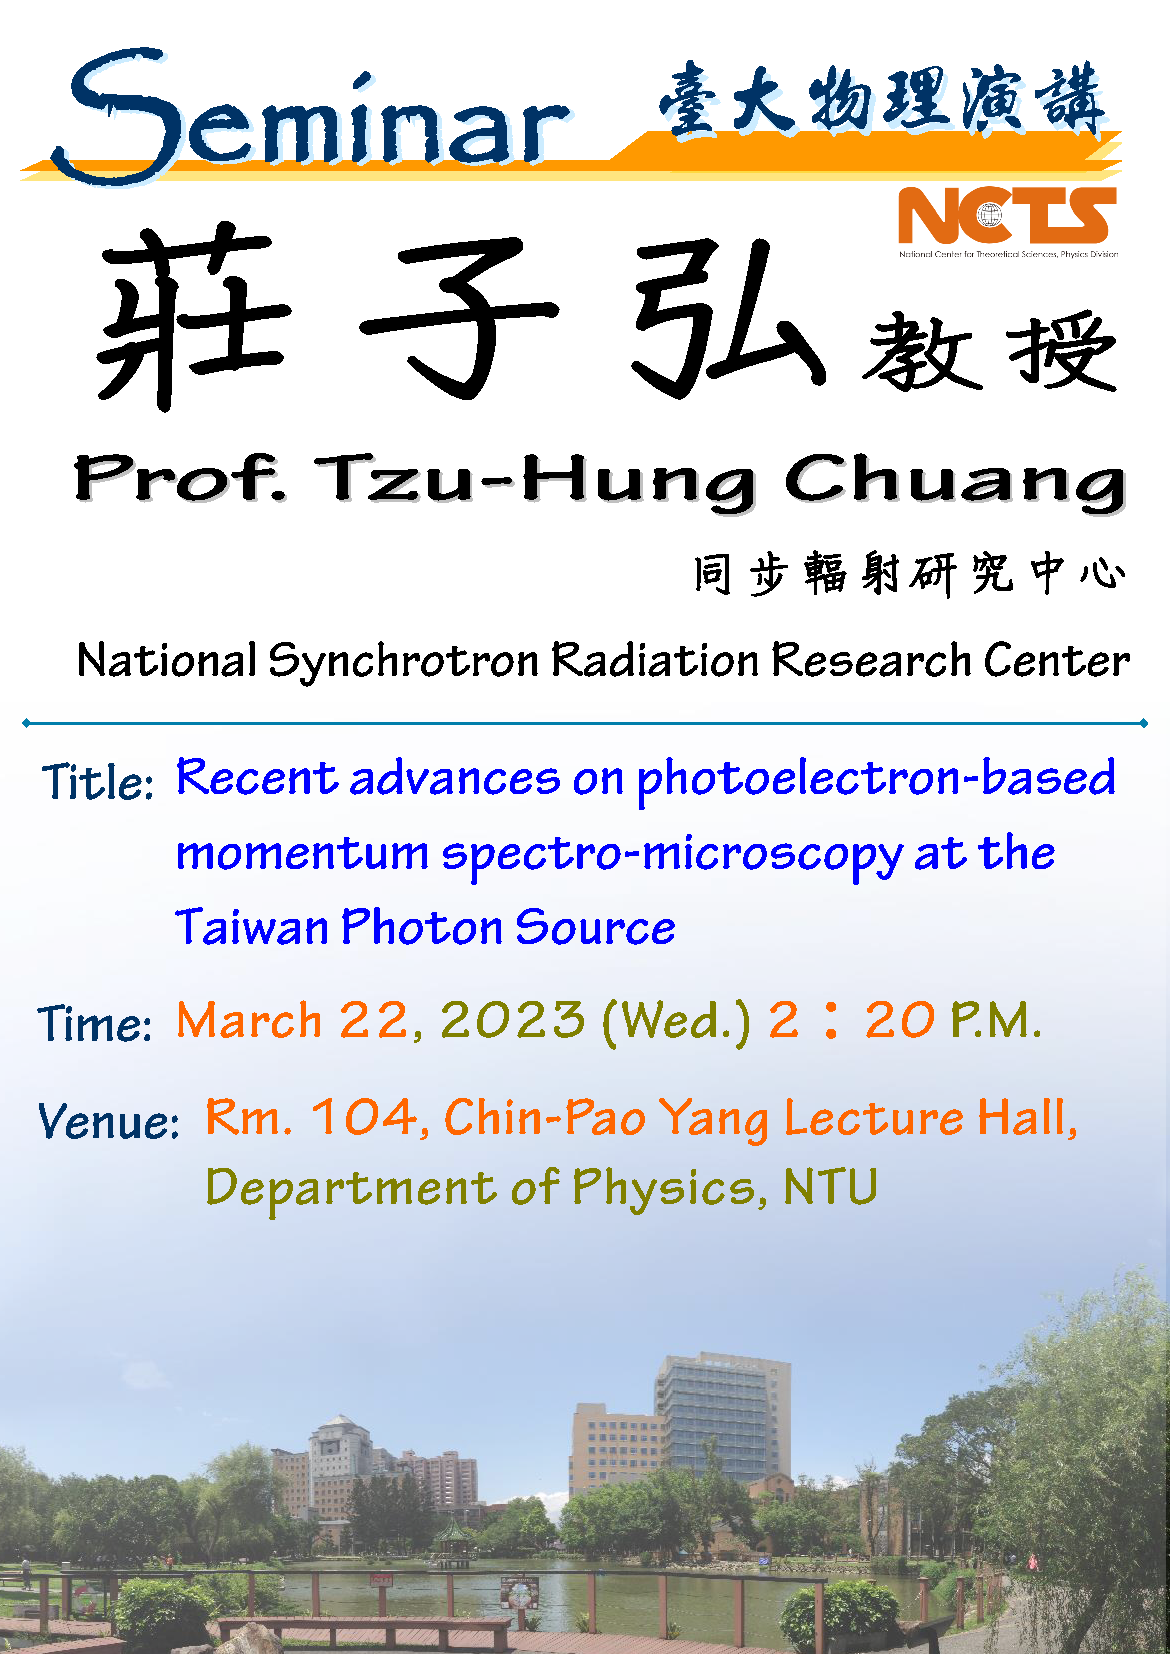 Recent advances on photoelectron-based momentum spectro-microscopy at the Taiwan Photon Source